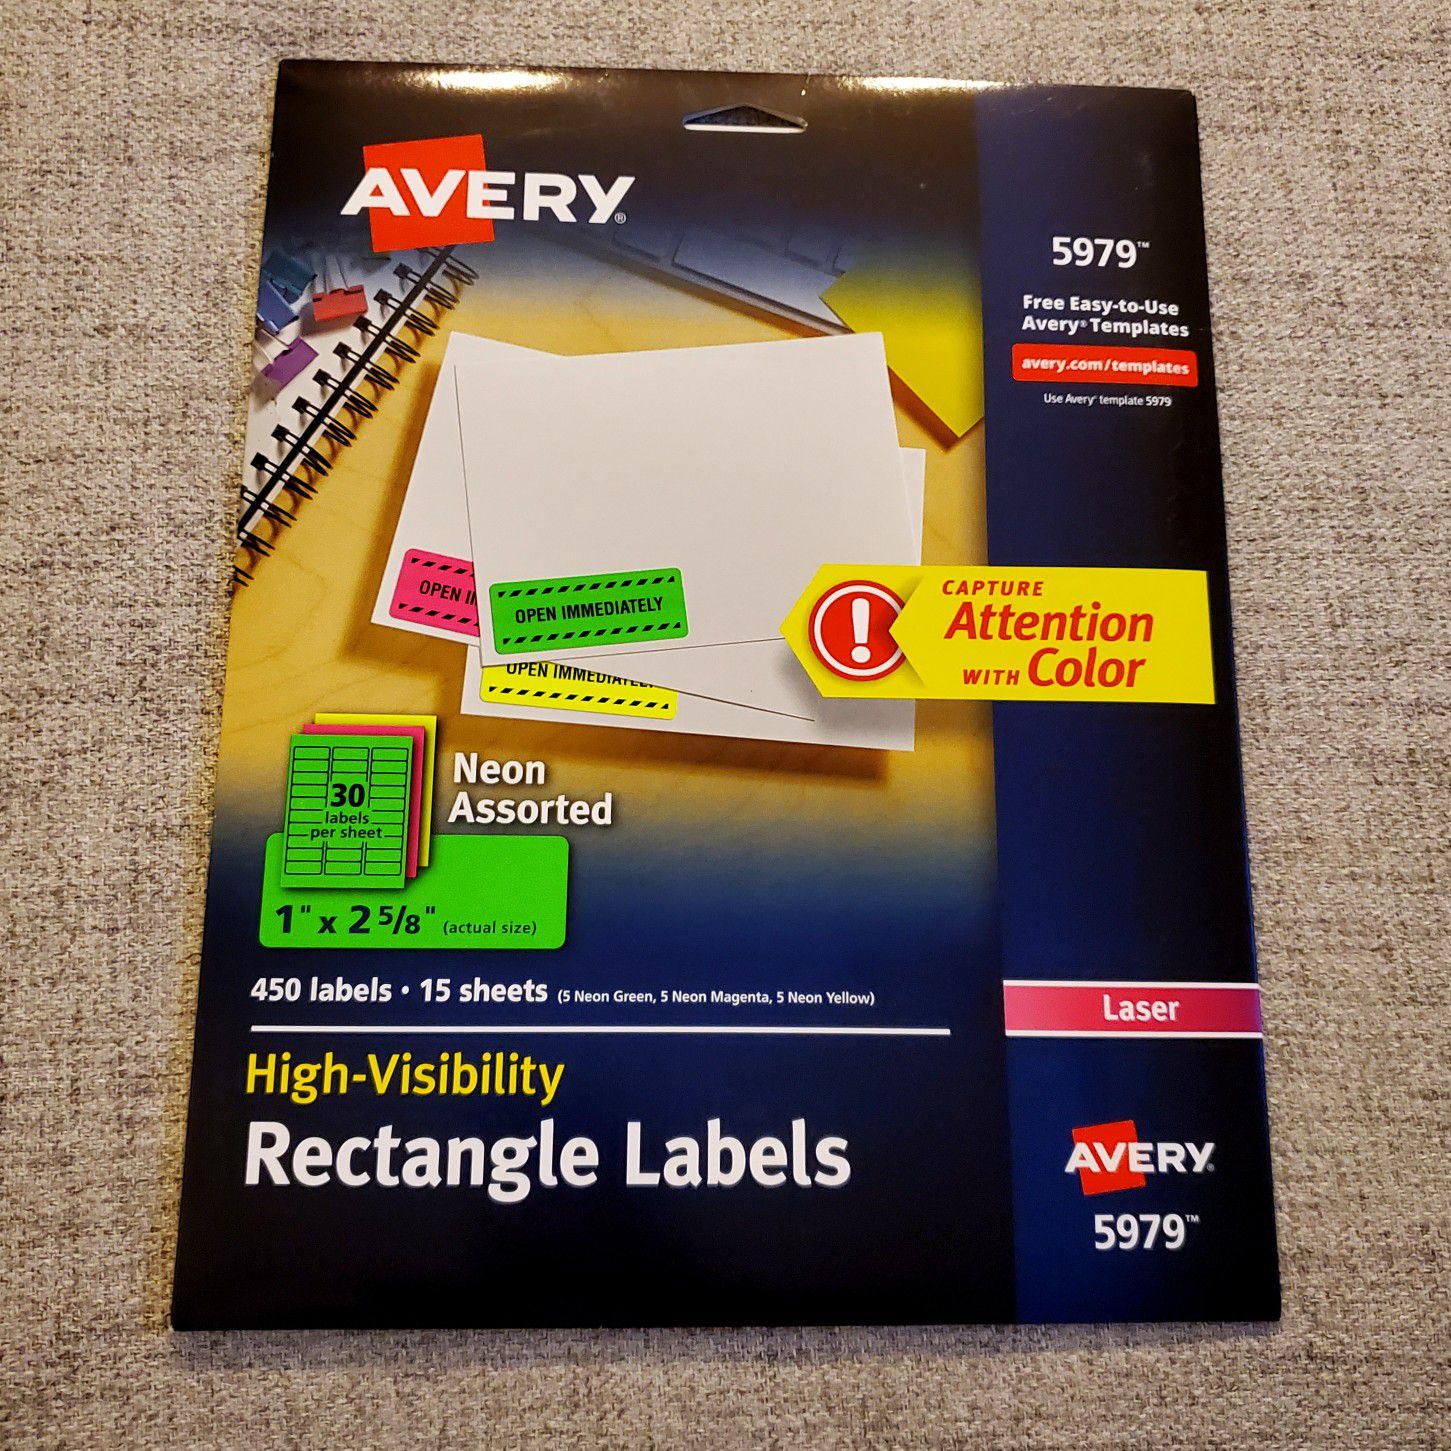 Avery 5979 Neon Laser Address Labels, 1" X 2-5/8", Assorted Colors, 450/Box